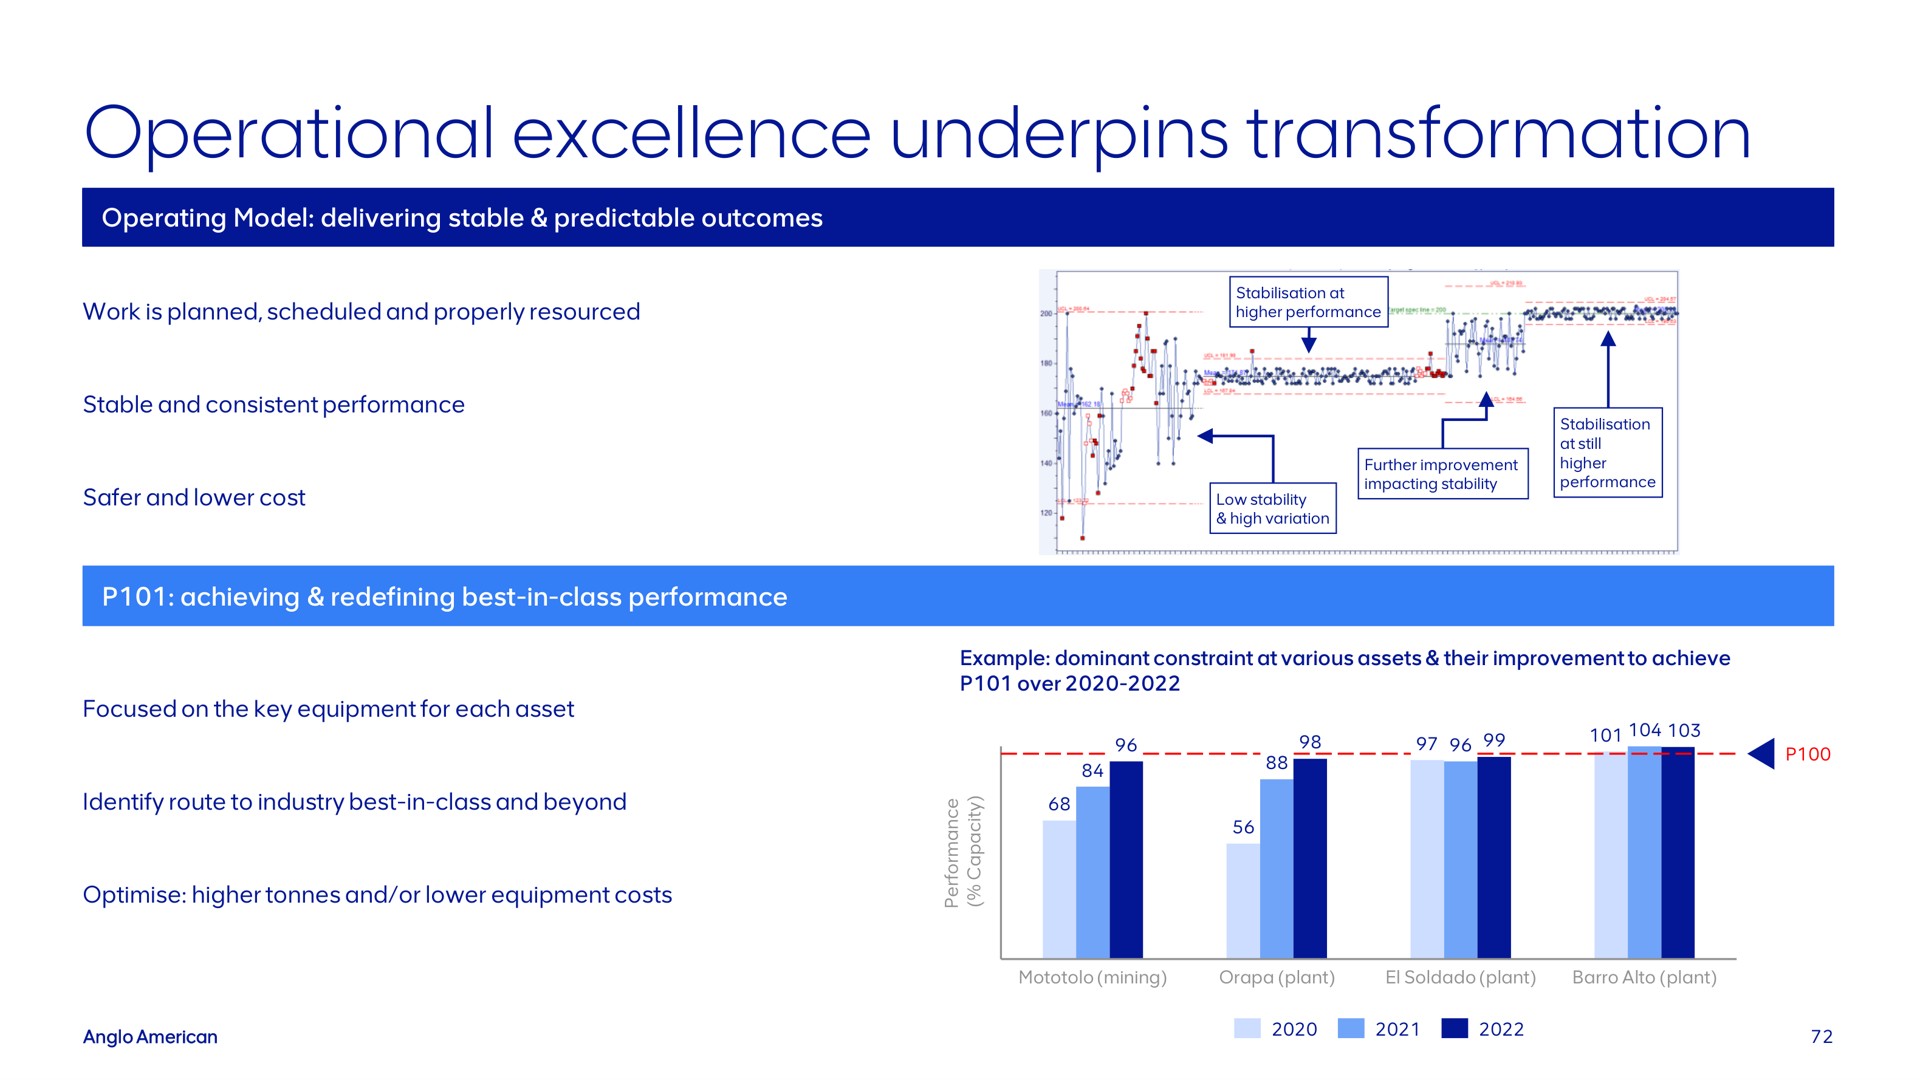 operational excellence underpins transformation | AngloAmerican